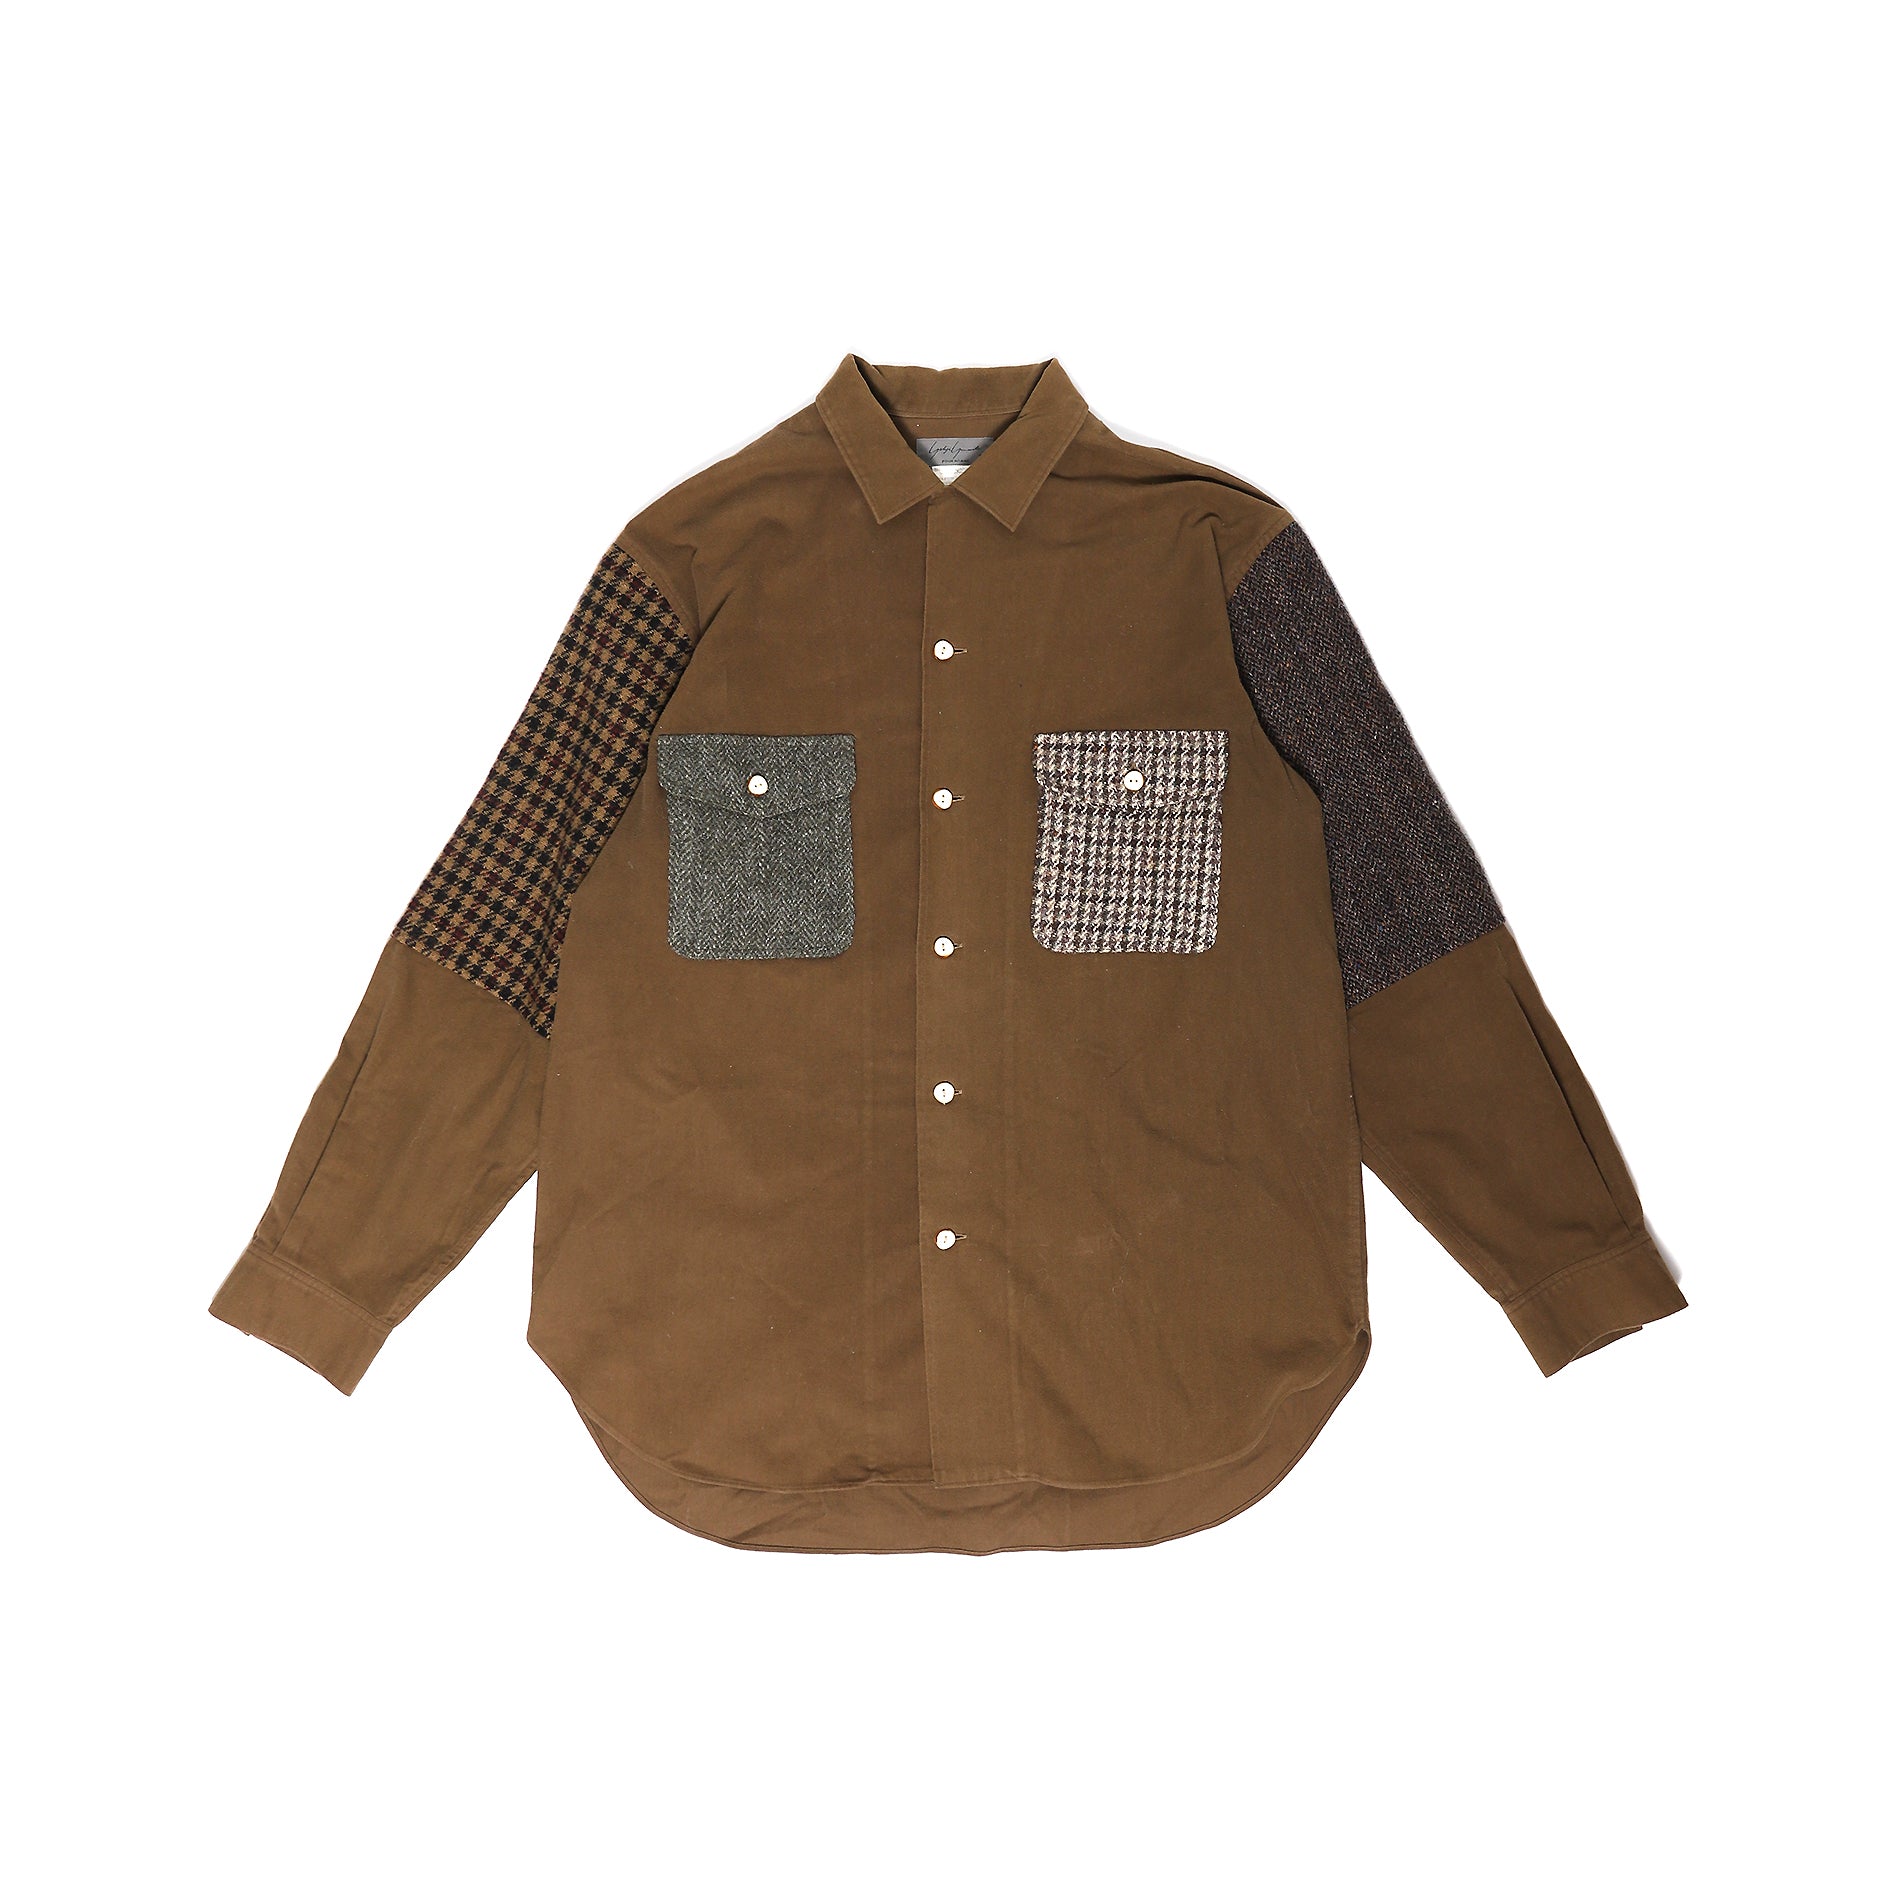 Yohji Yamamoto Pour Homme 80s Brown Patchwork Button-Up Shirt